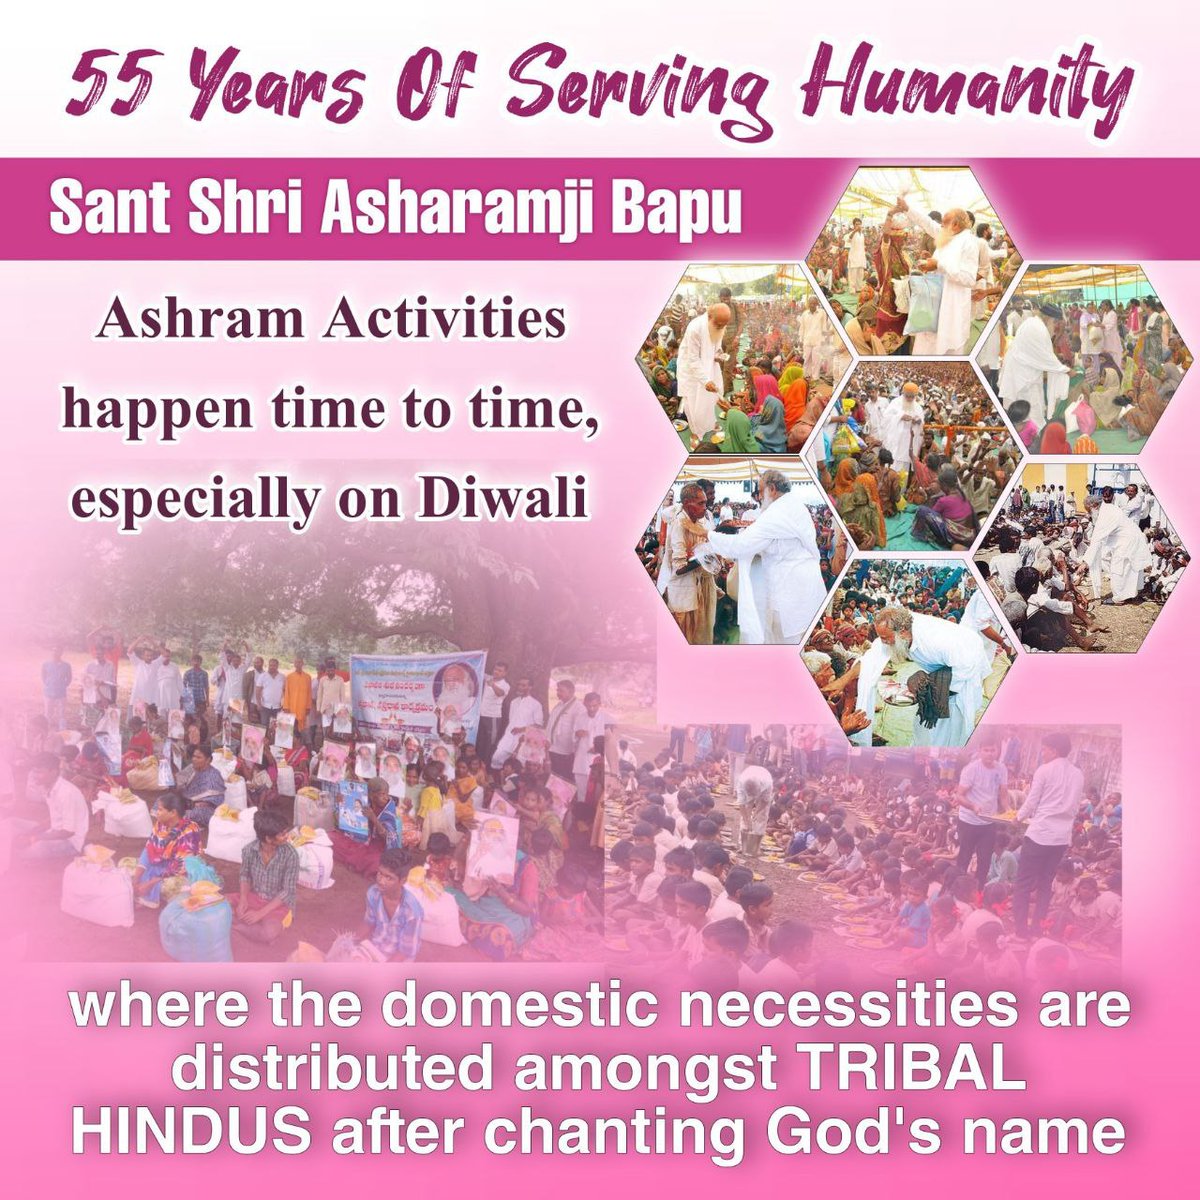 #प्राणिमात्र_के_हितैषी Sant Shri Asharamji Bapu is a great saint who has dedicated 55 years of his life in the service of Sanatan Dharma.
He has been implicated in a false case by the conspirators, but even today the Devi works inspired by him are continuing smoothly. ✨💐